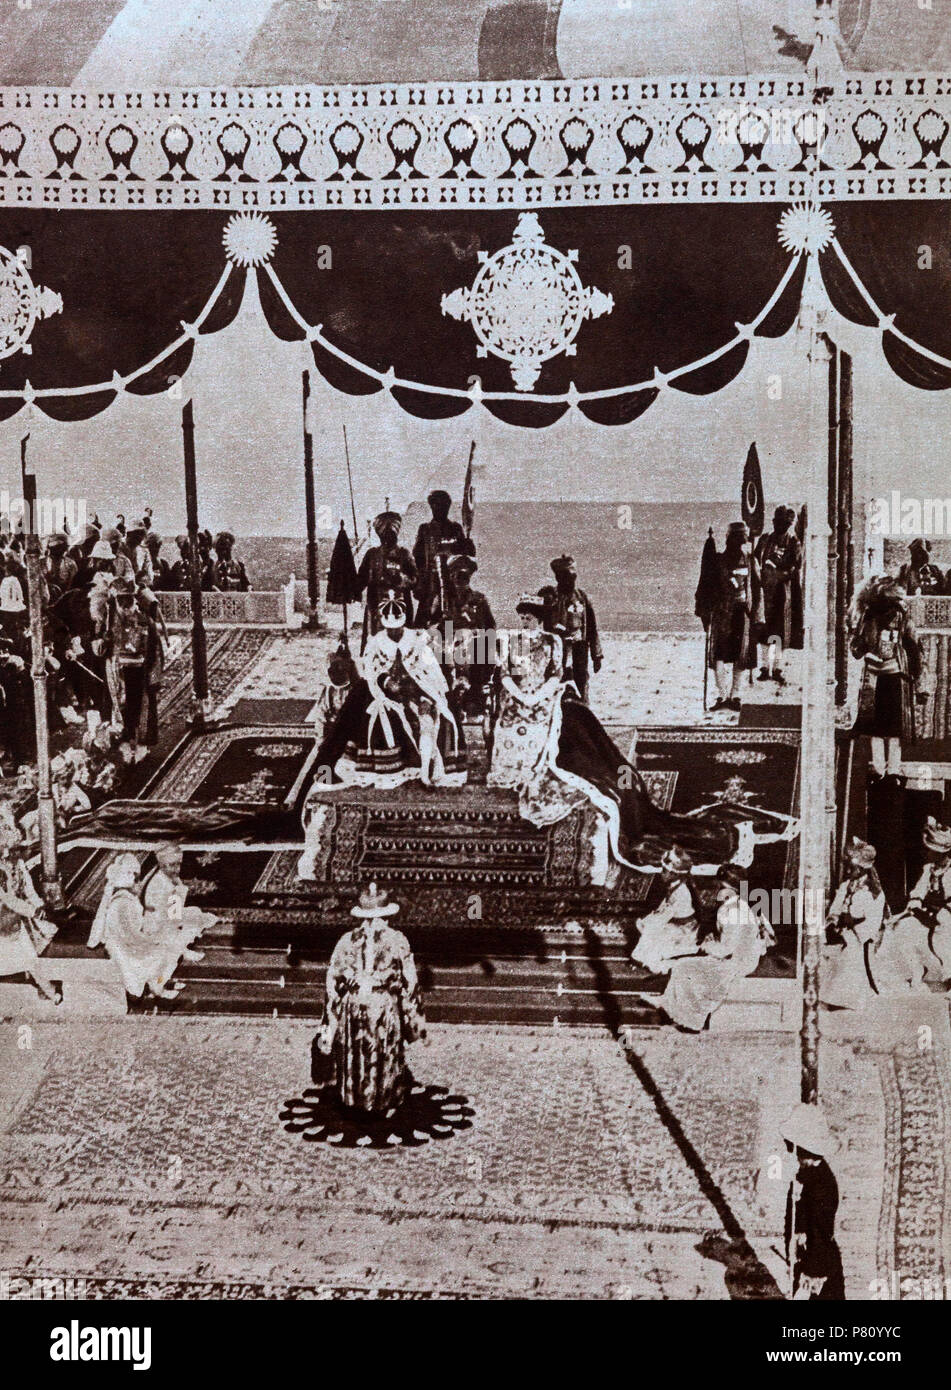 The Delhi Durbar of 1911, meaning 'Court of Delhi', was an Indian imperial style mass assembly organised by the British at Coronation Park, Delhi, India, to mark the succession of an Emperor or Empress of India. Also known as the Imperial Durbar, it was held three times, in 1877, 1903, and 1911, at the height of the British Empire. The 1911 Durbar was the only one that a sovereign, George V, attended.  The Nizam of Hyderabad pays homage to the Emperor and Empress at the Delhi Durbar, December 1911 Stock Photo